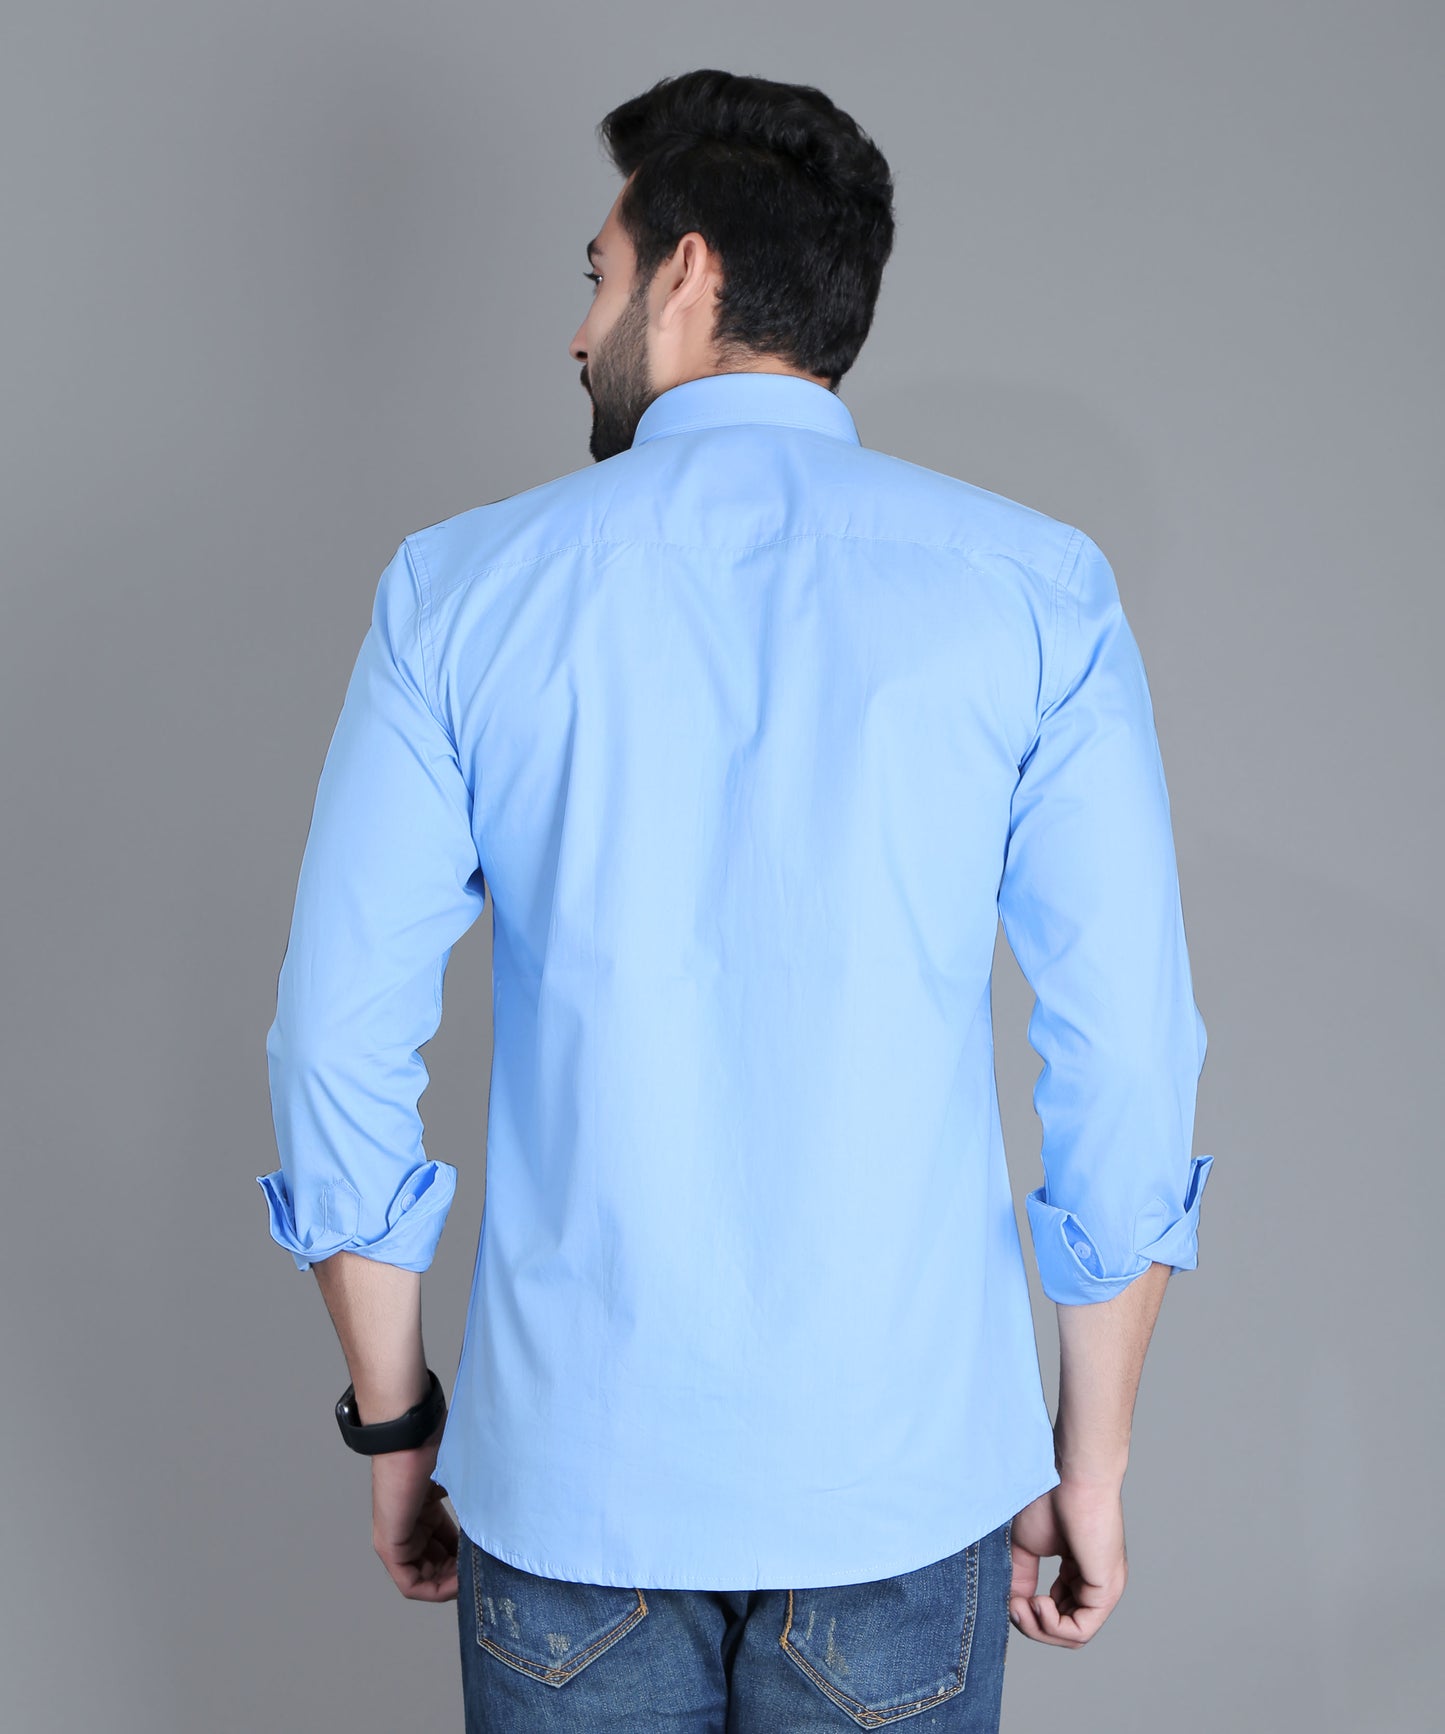 5thanfold Men's Casual Pure Cotton Full Sleeve Solid Sky Blue Slim Fit Shirt